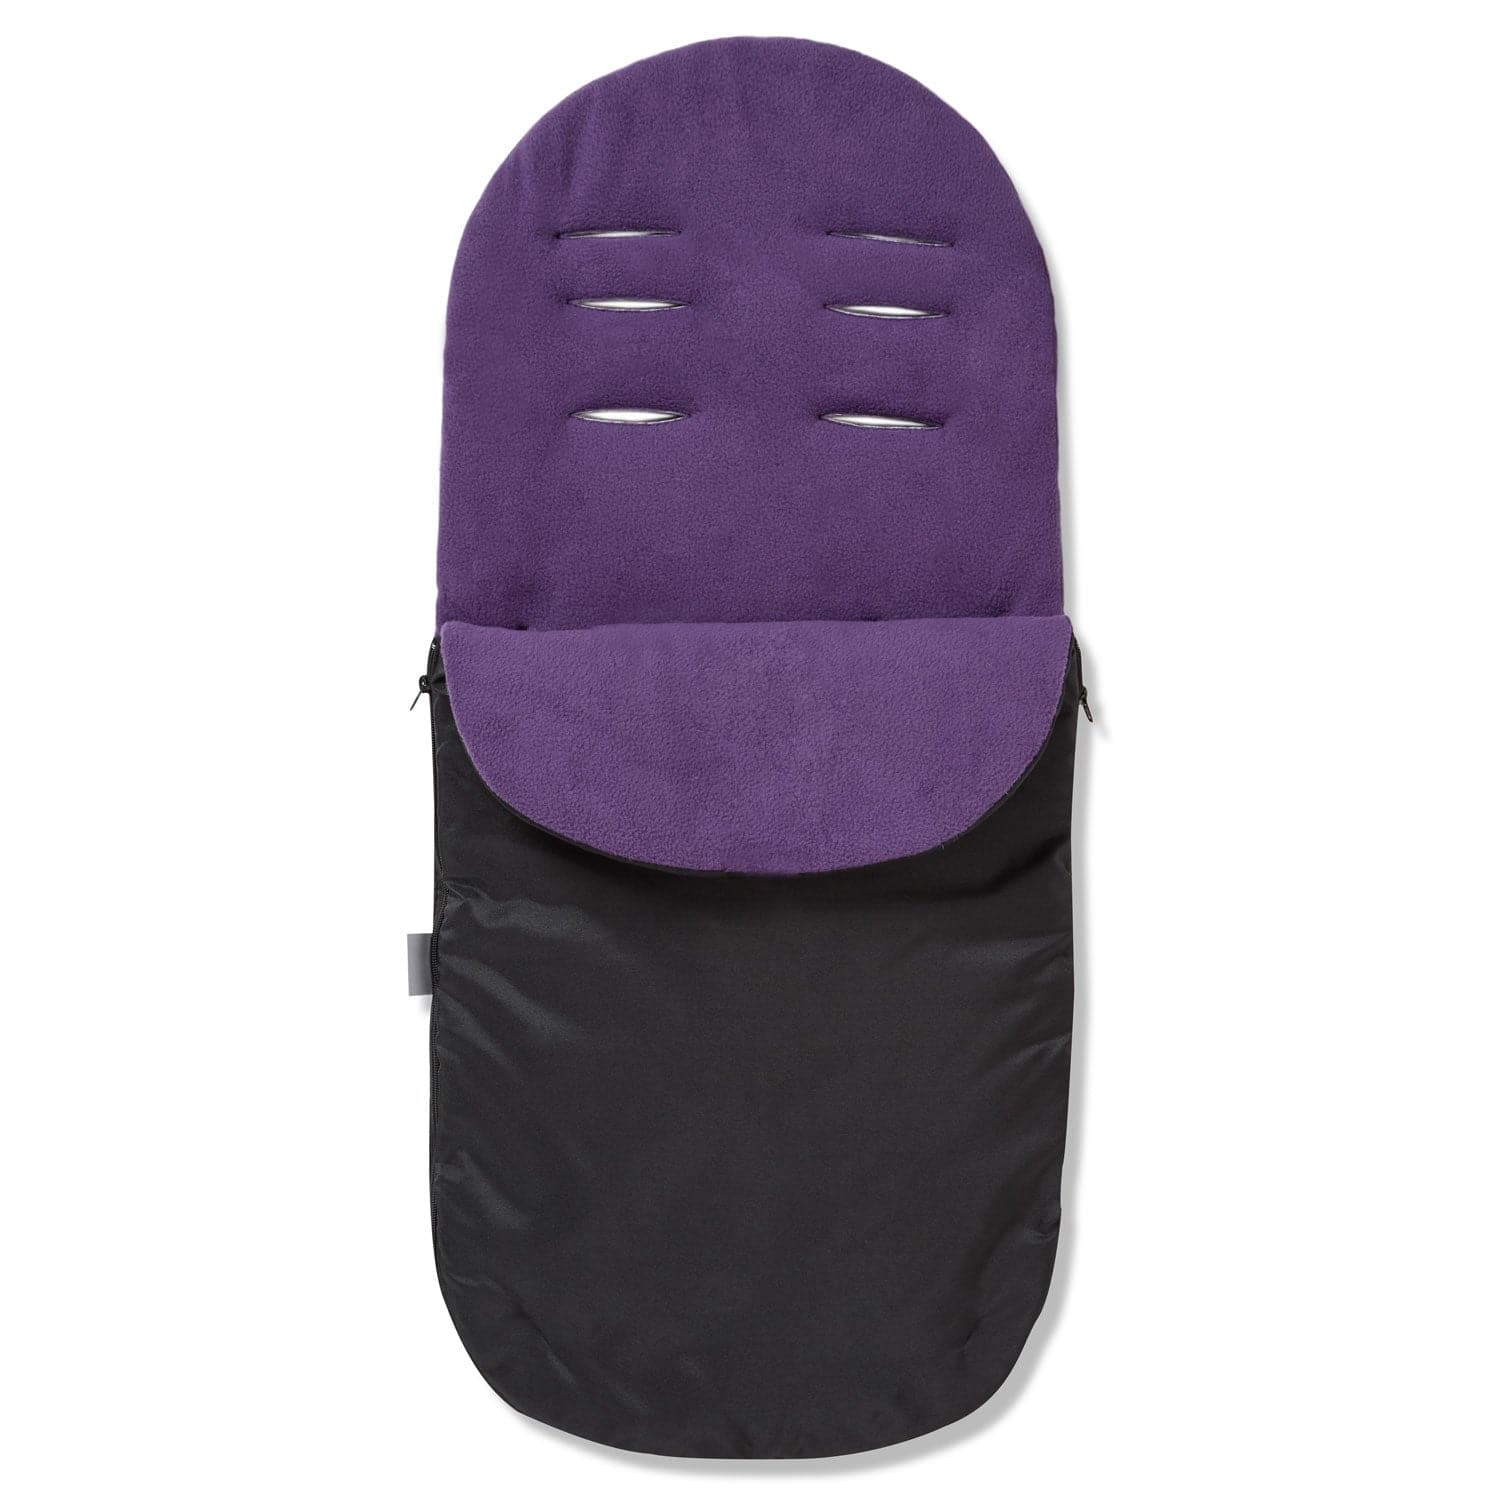 Footmuff / Cosy Toes Compatible with Seed - Purple / Fits All Models | For Your Little One